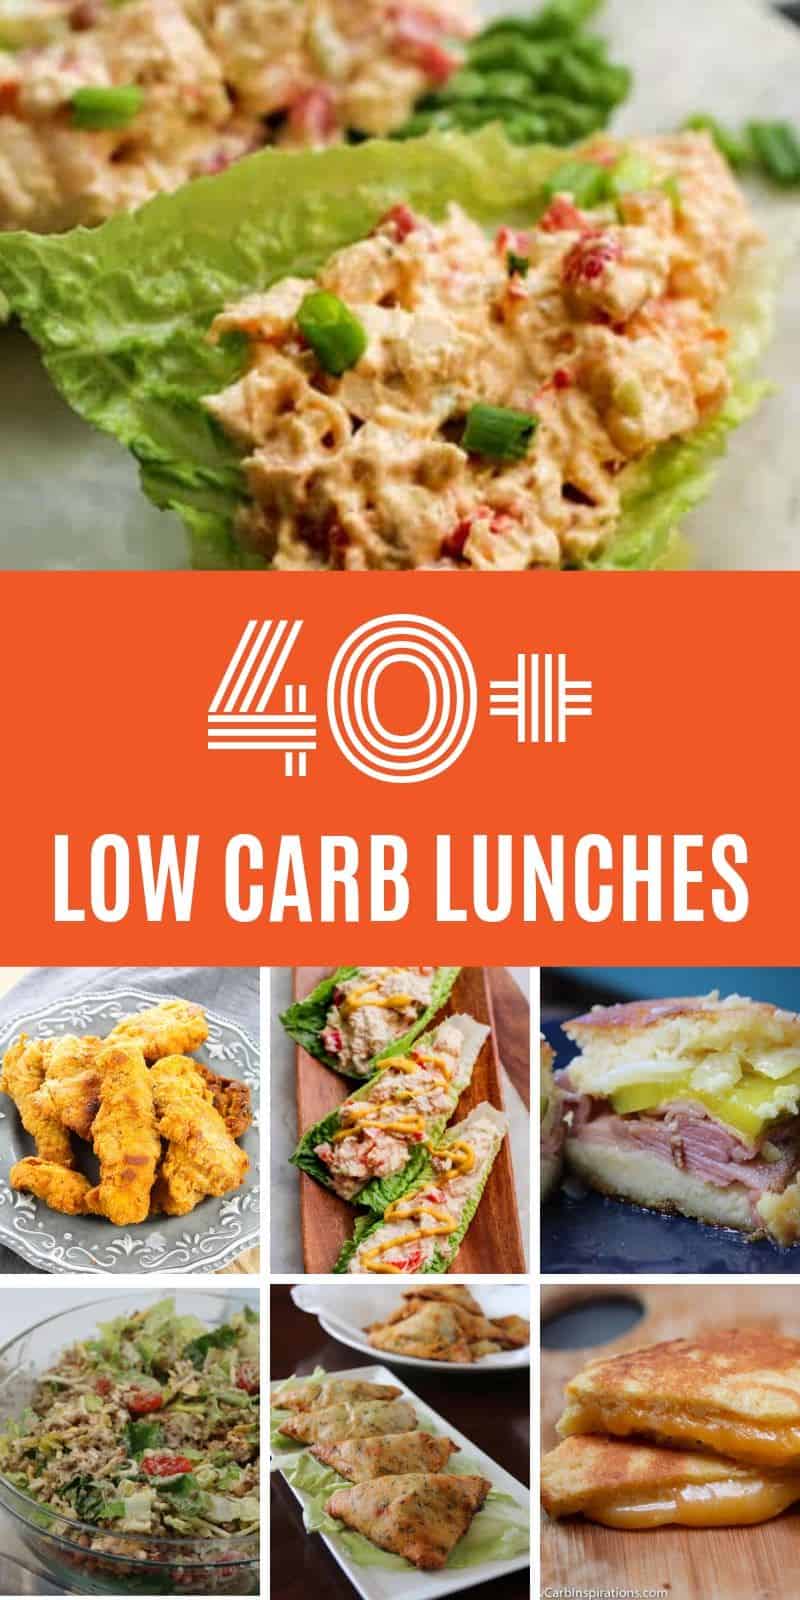 40+ Low Carb Lunch Ideas for the Keto Diet